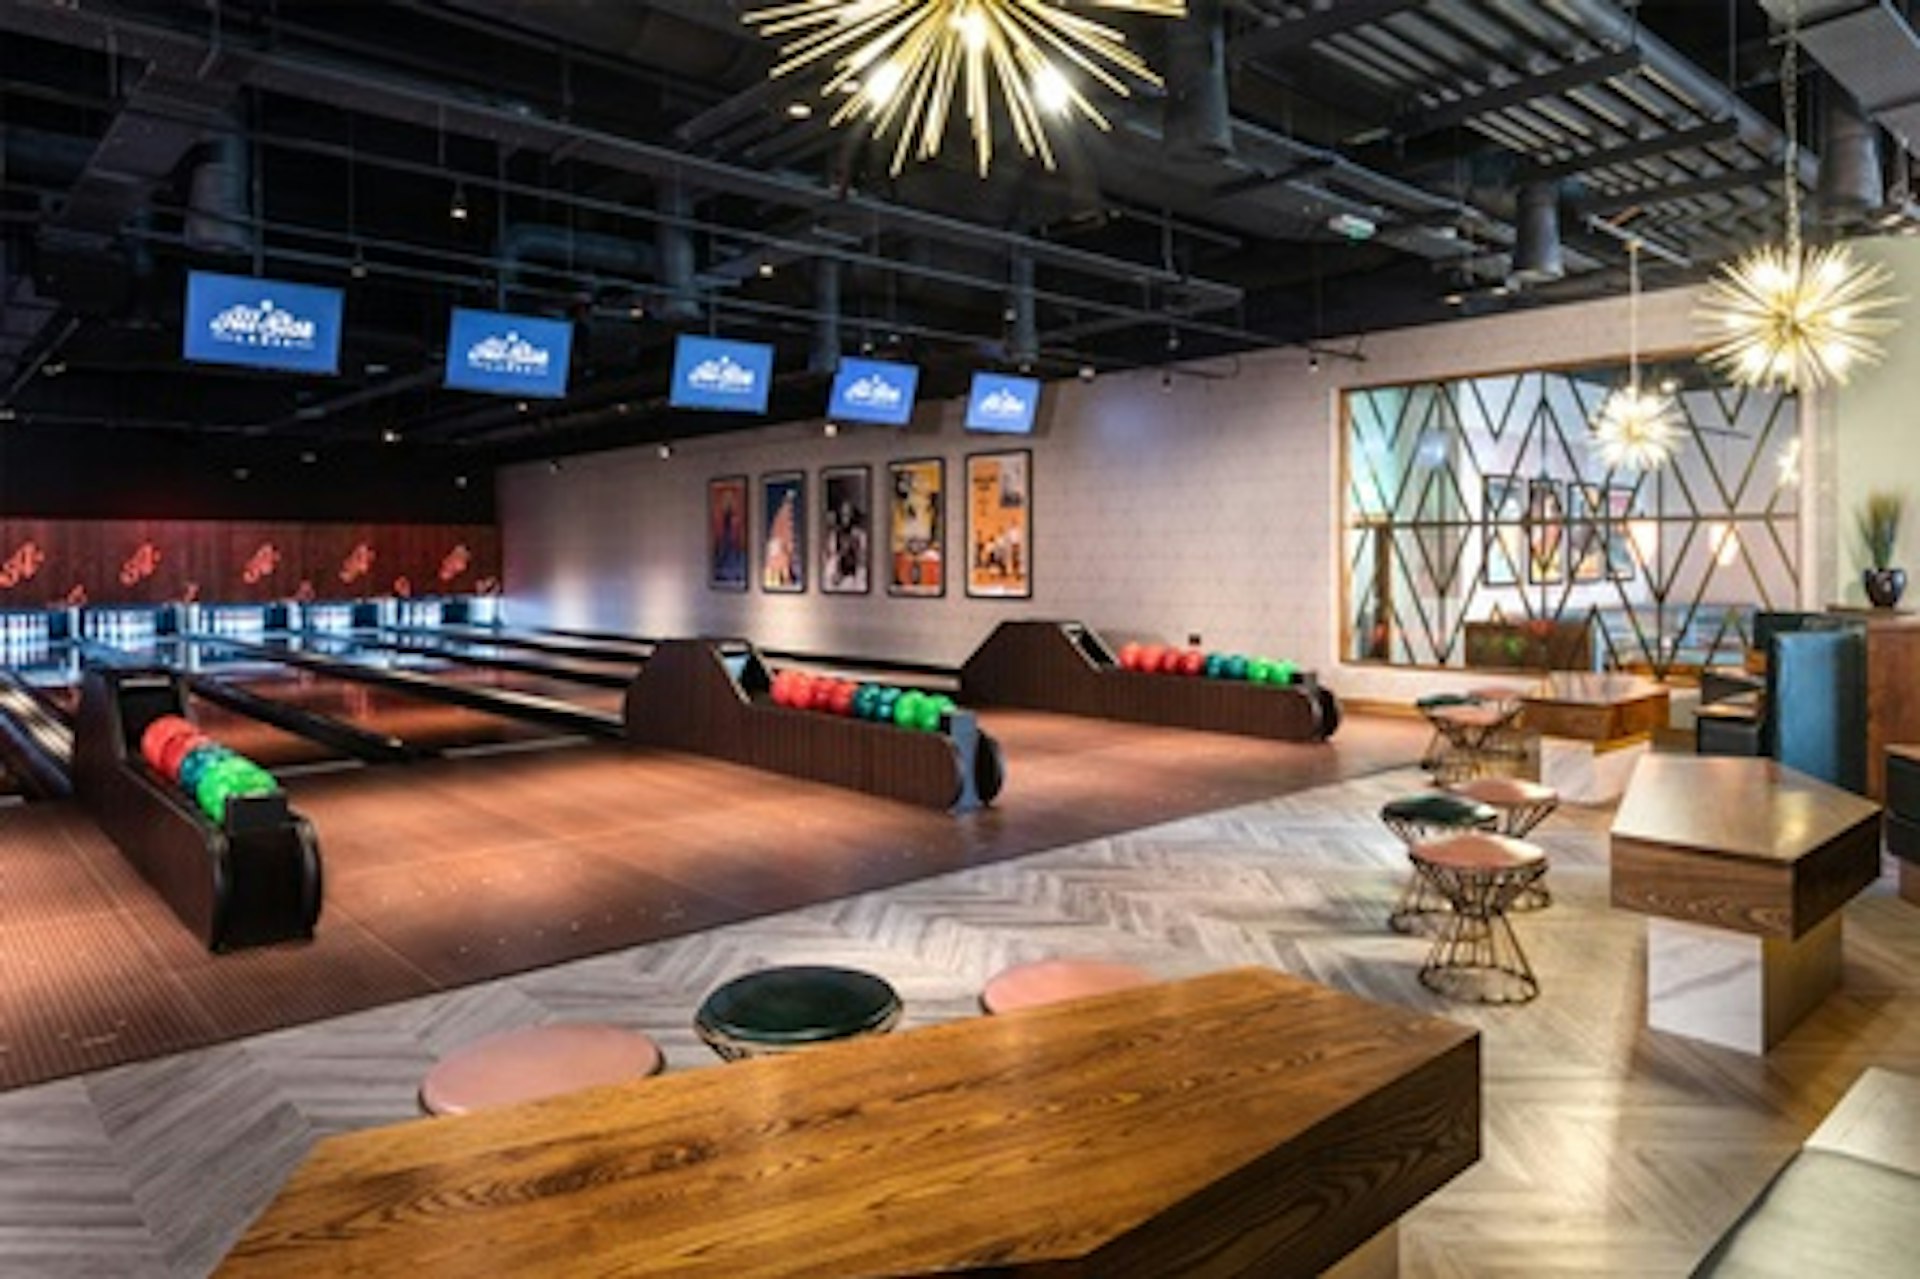 Drink, Dine and Boutique Bowling for Two at All Star Lanes 2